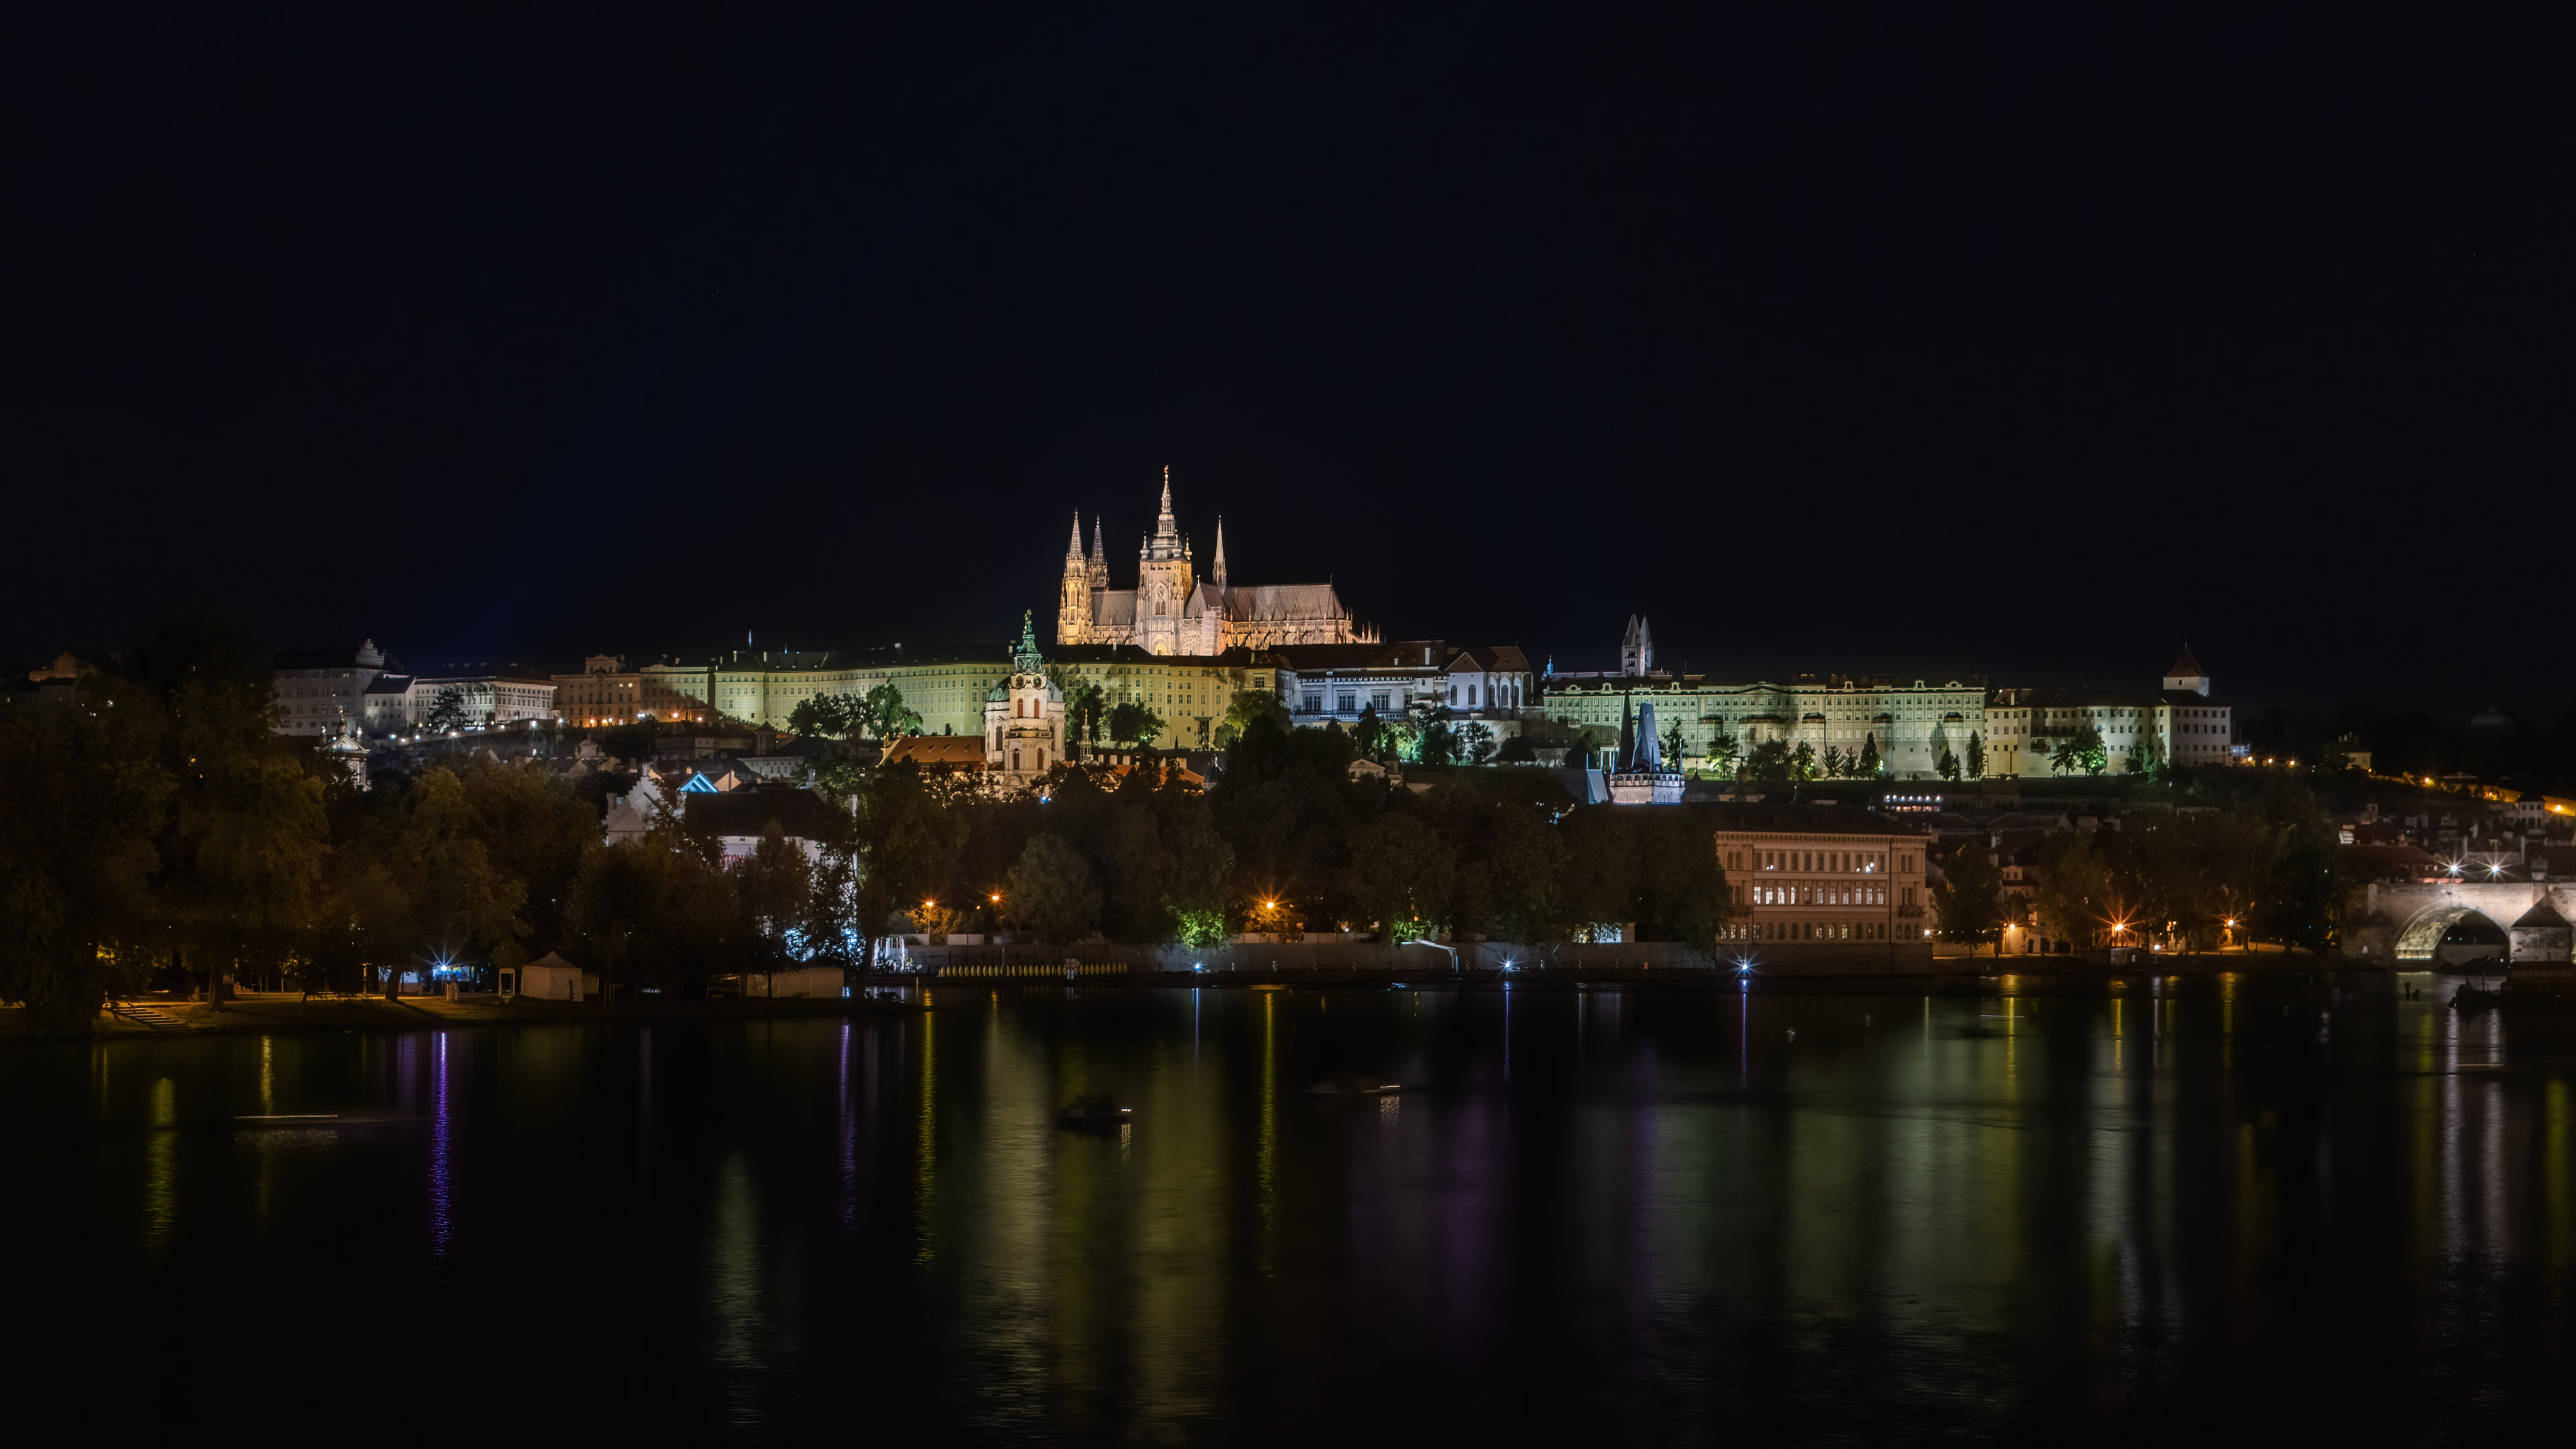 This enchanting wallpaper captures the beauty of Prague at night with its colorful buildings and reflections on the water.